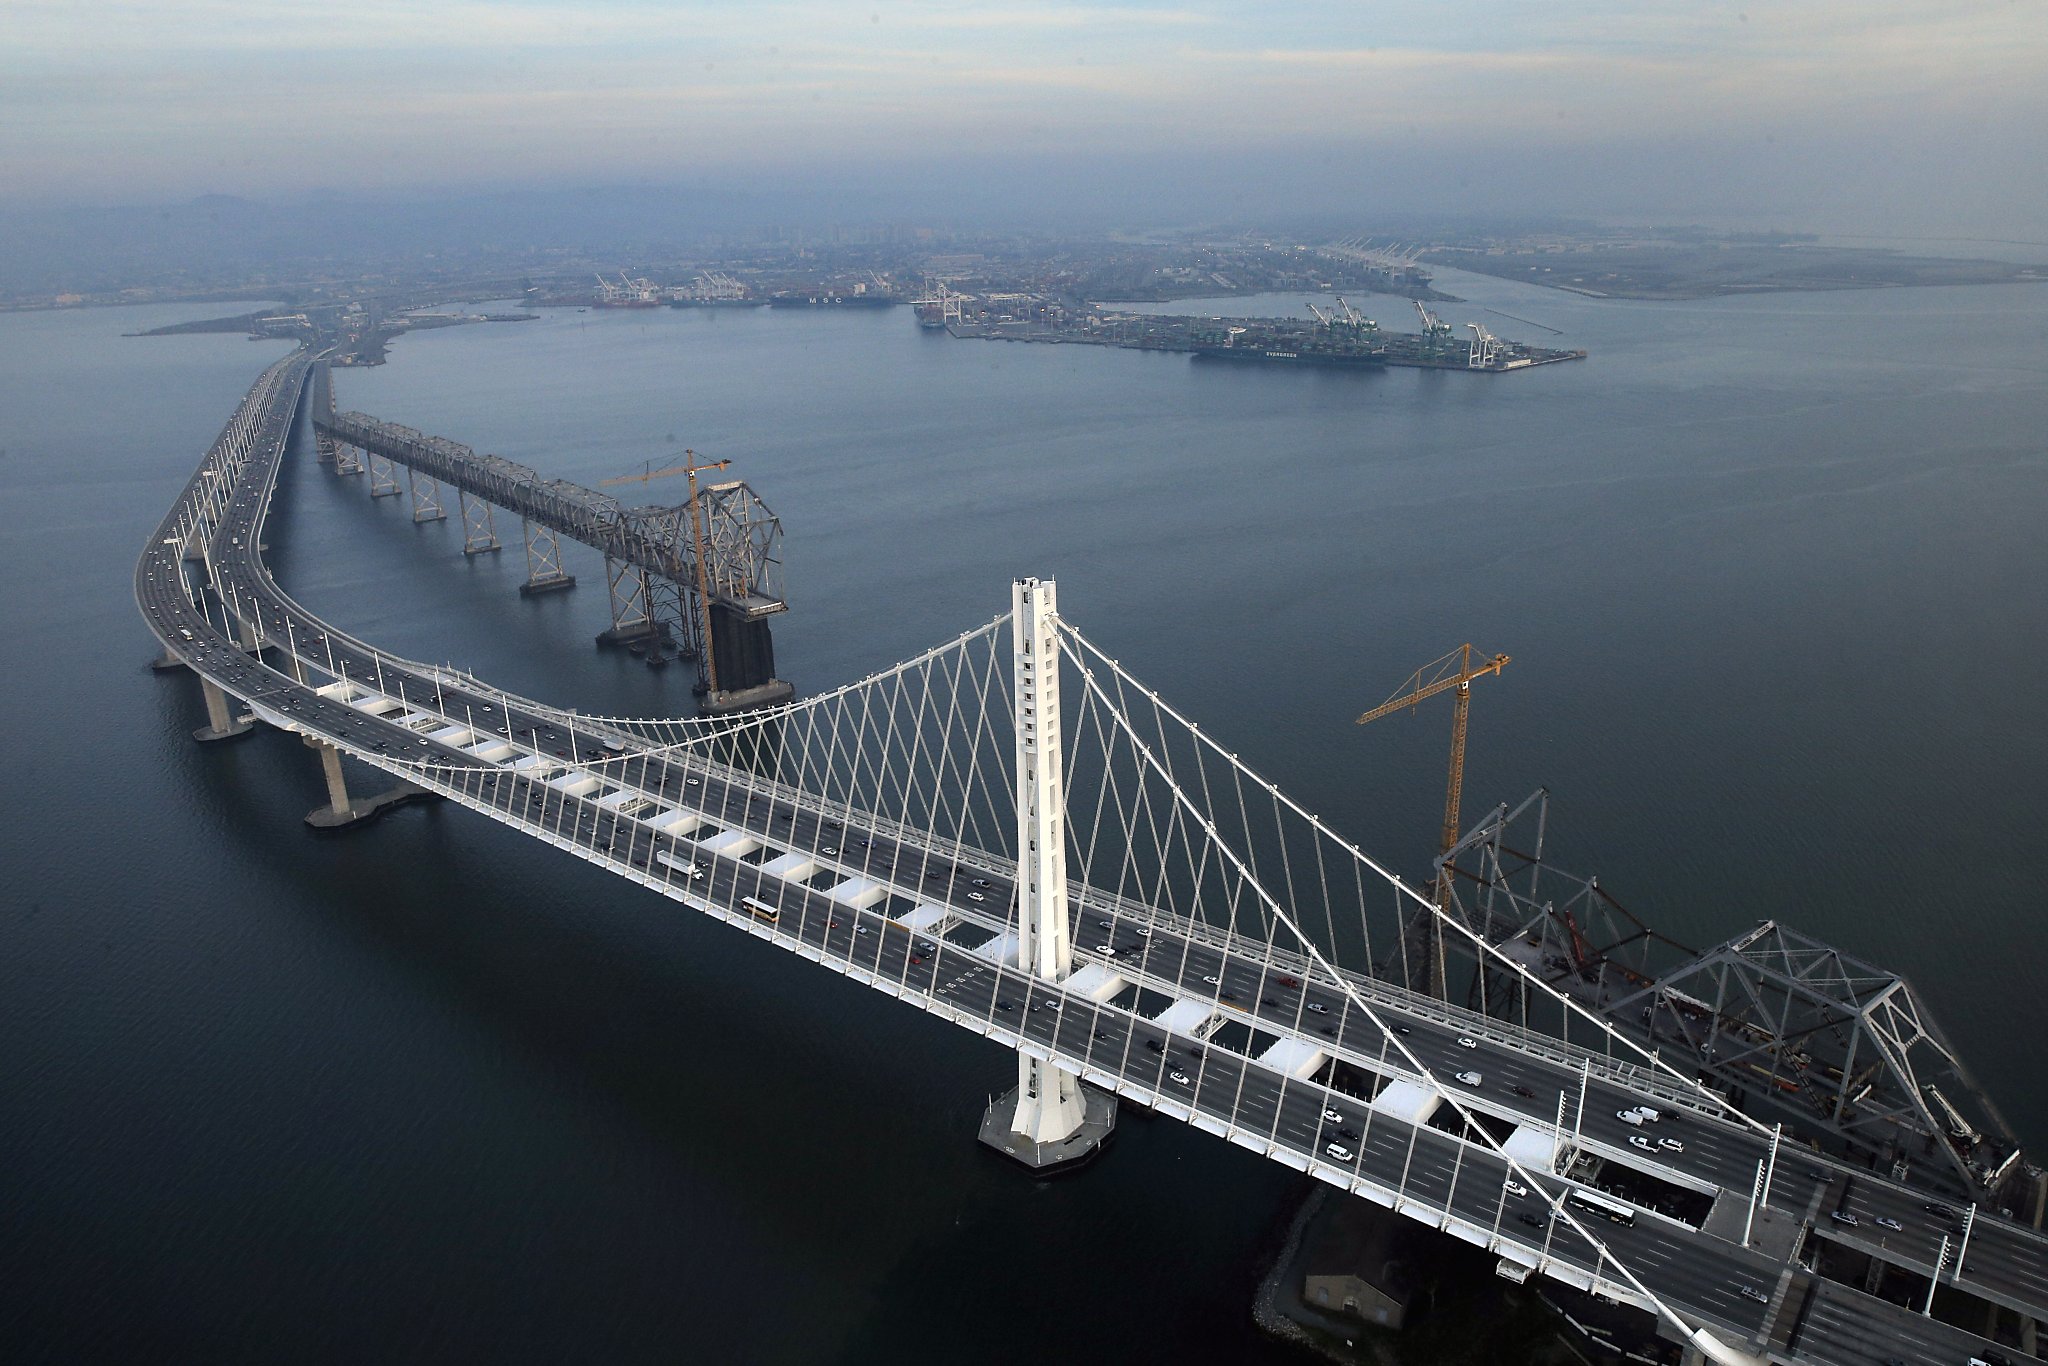 Plague of problems puts Bay Bridge seismic safety in question - SFGate